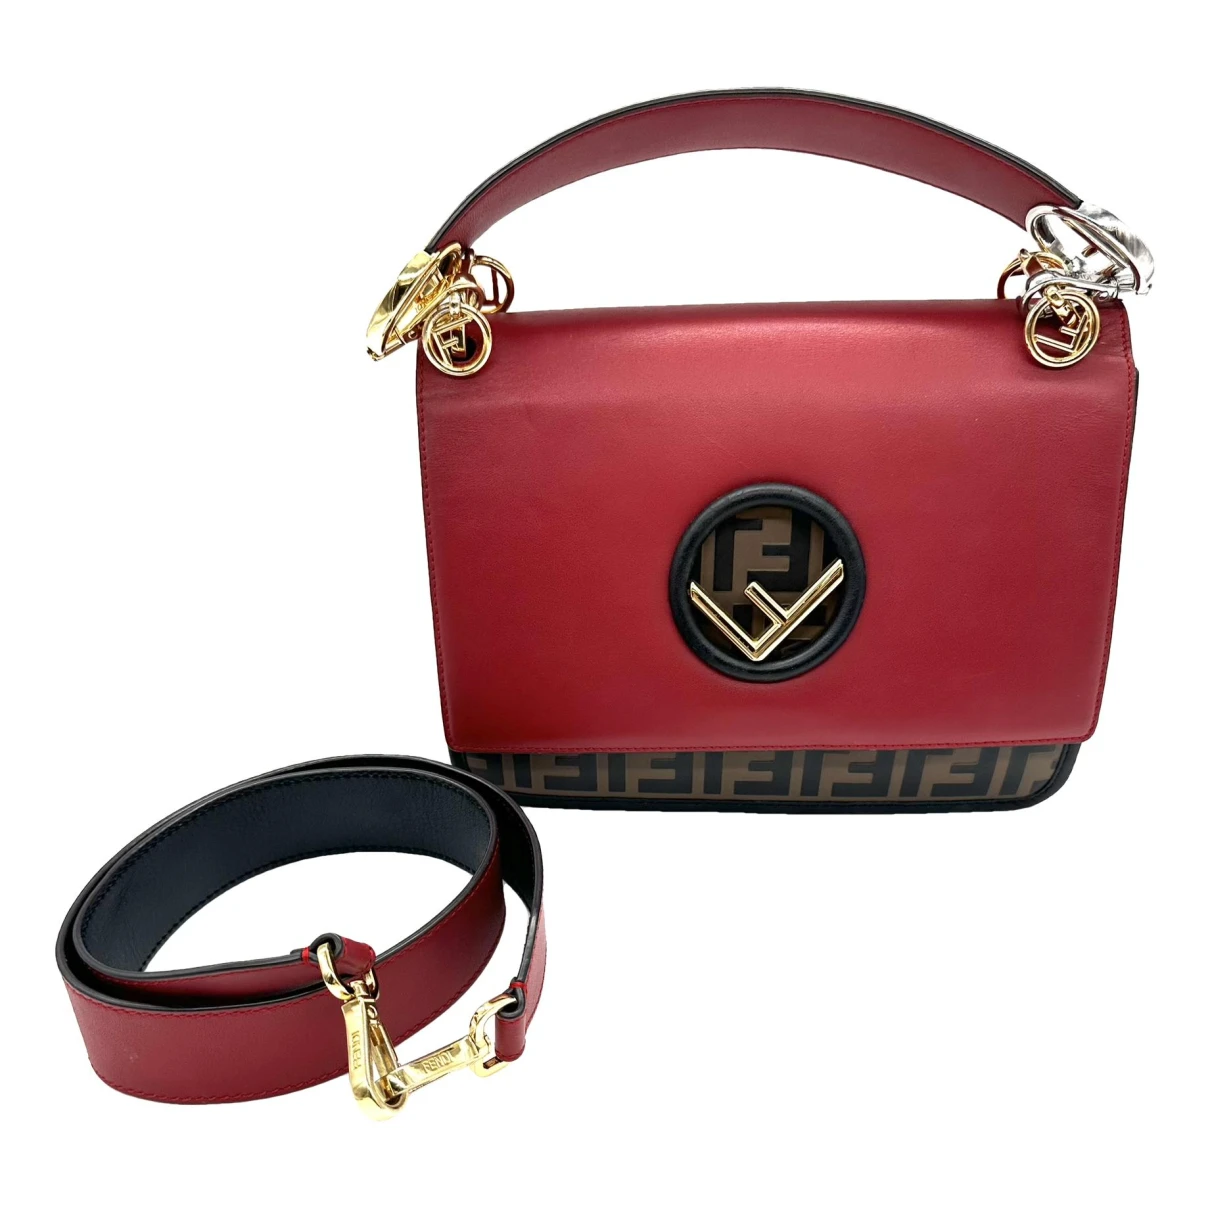 Pre-owned Fendi Leather Clutch Bag In Multicolour